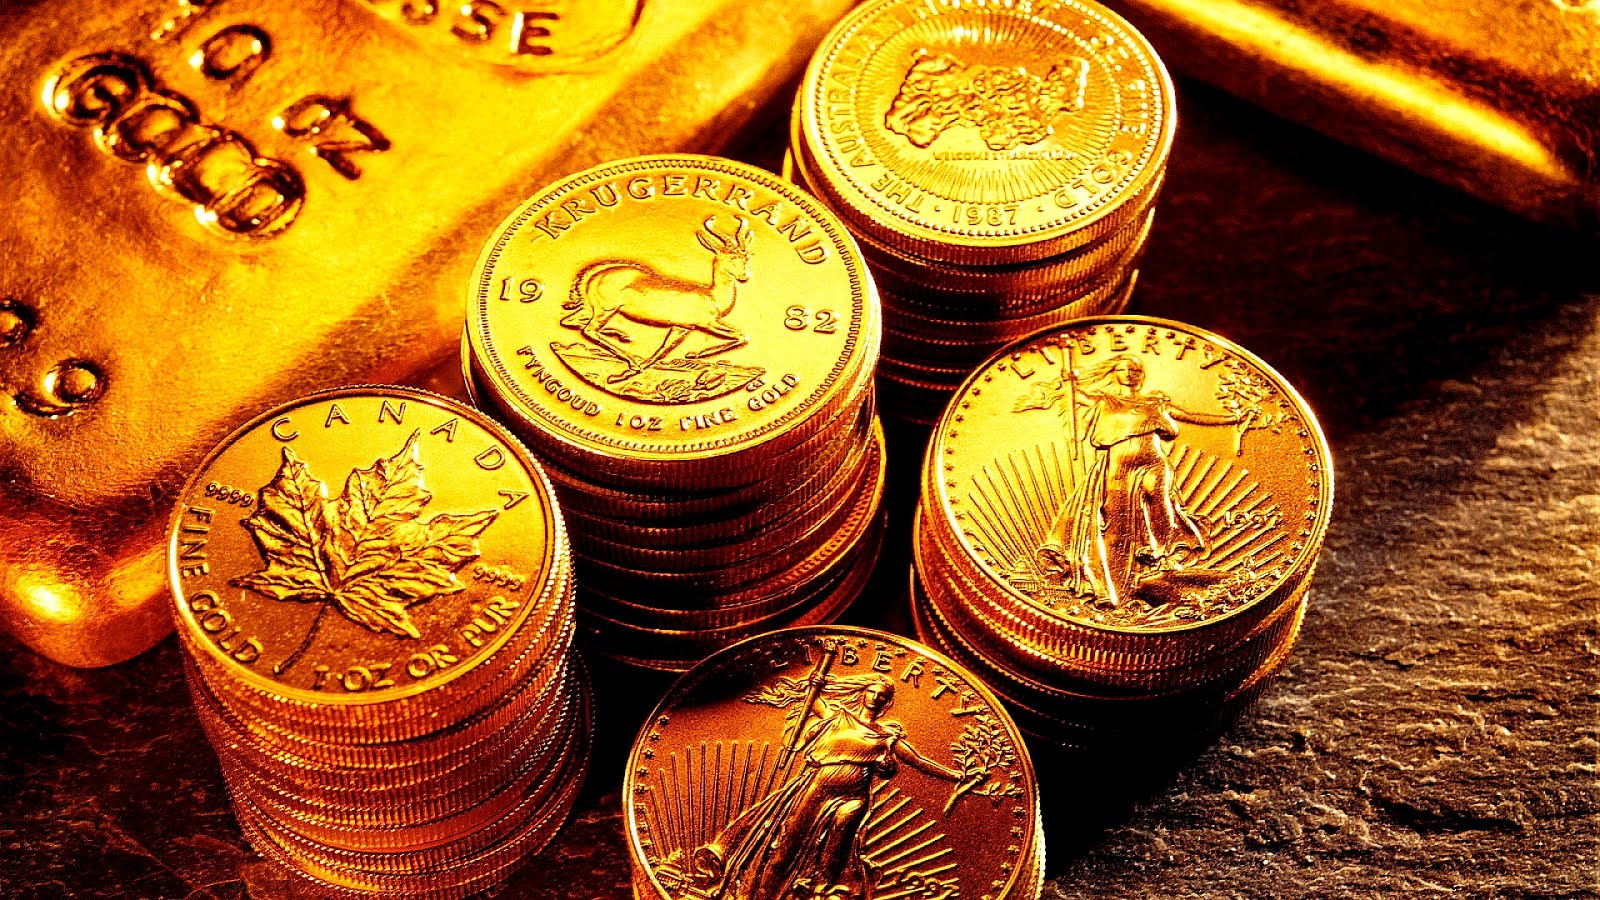 Best Place To Buy Gold Bullion Online - Gold Choices